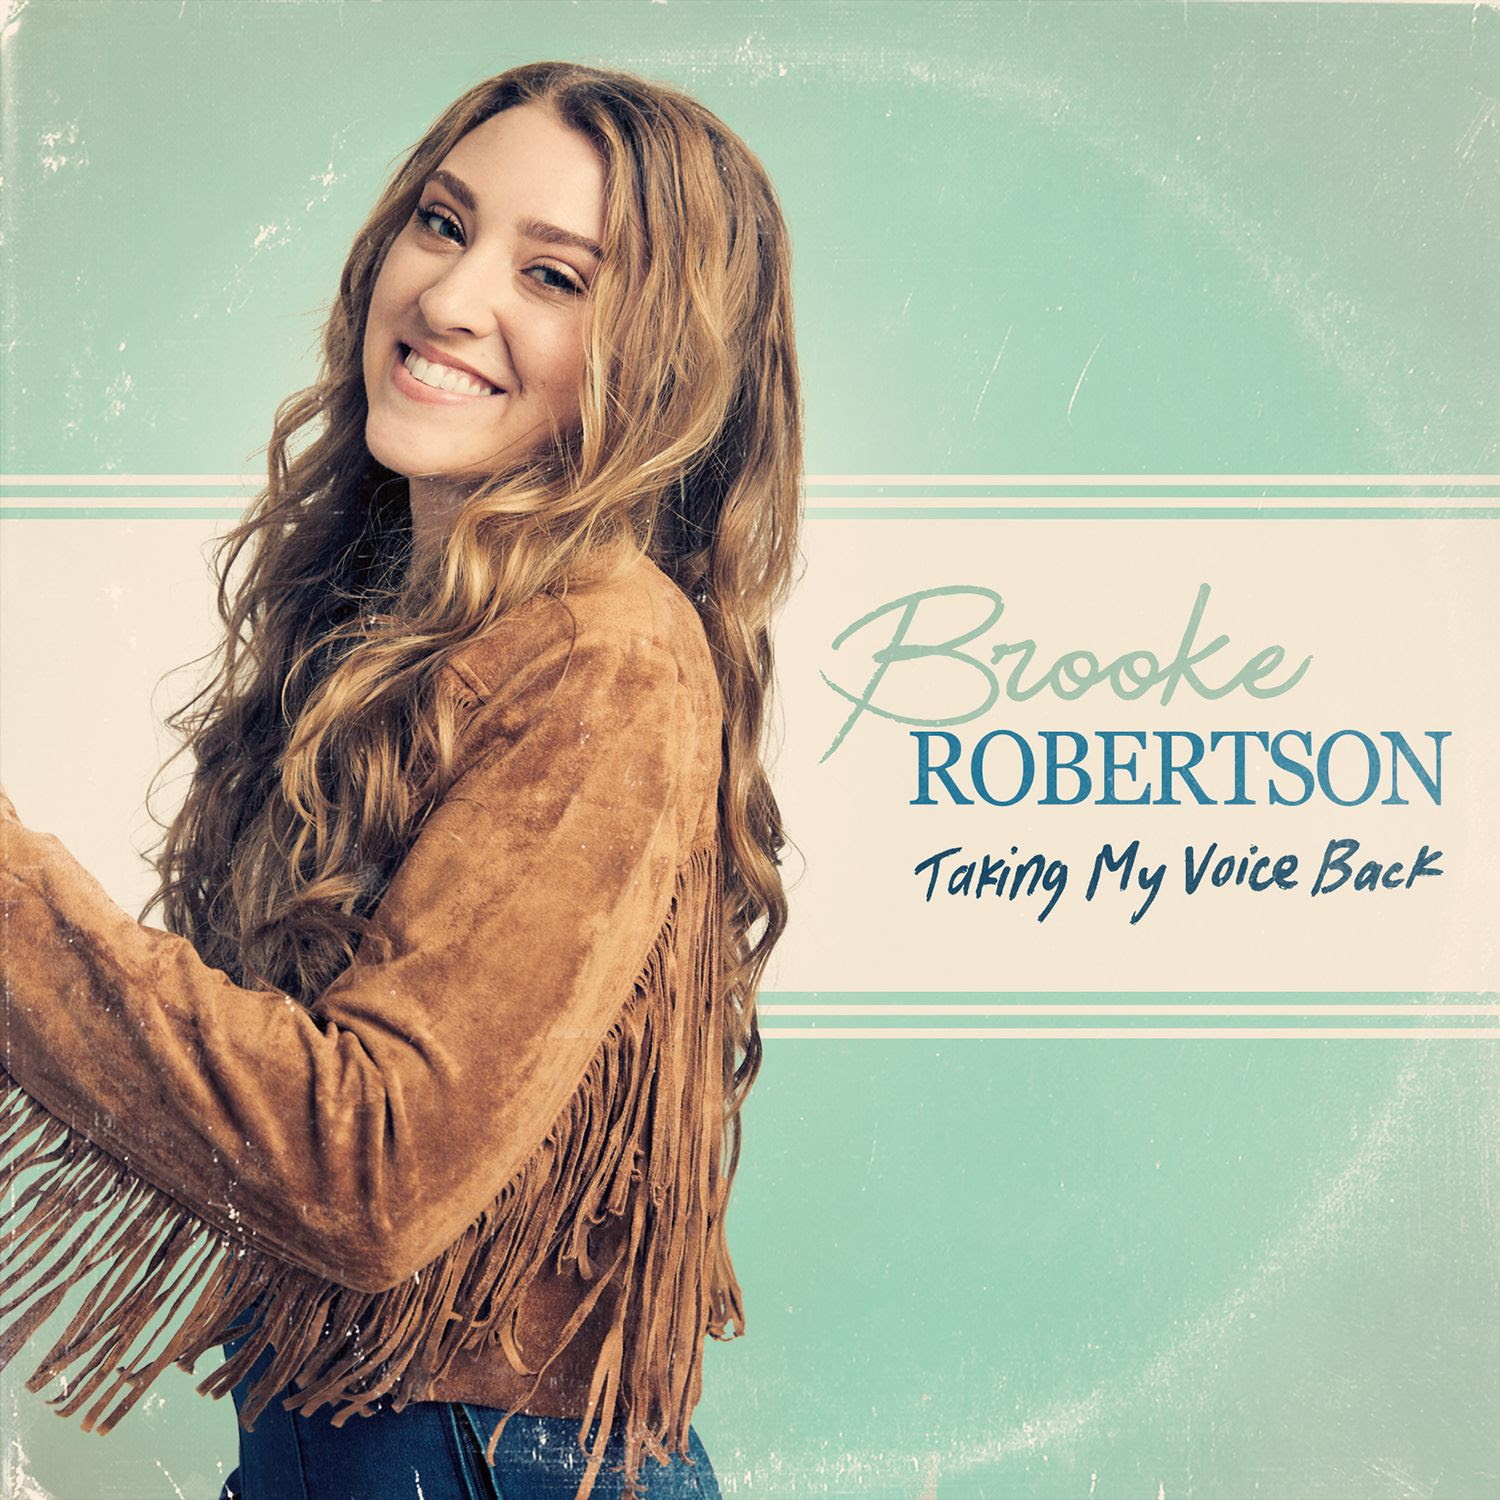 Brooke Roberson. Voices back